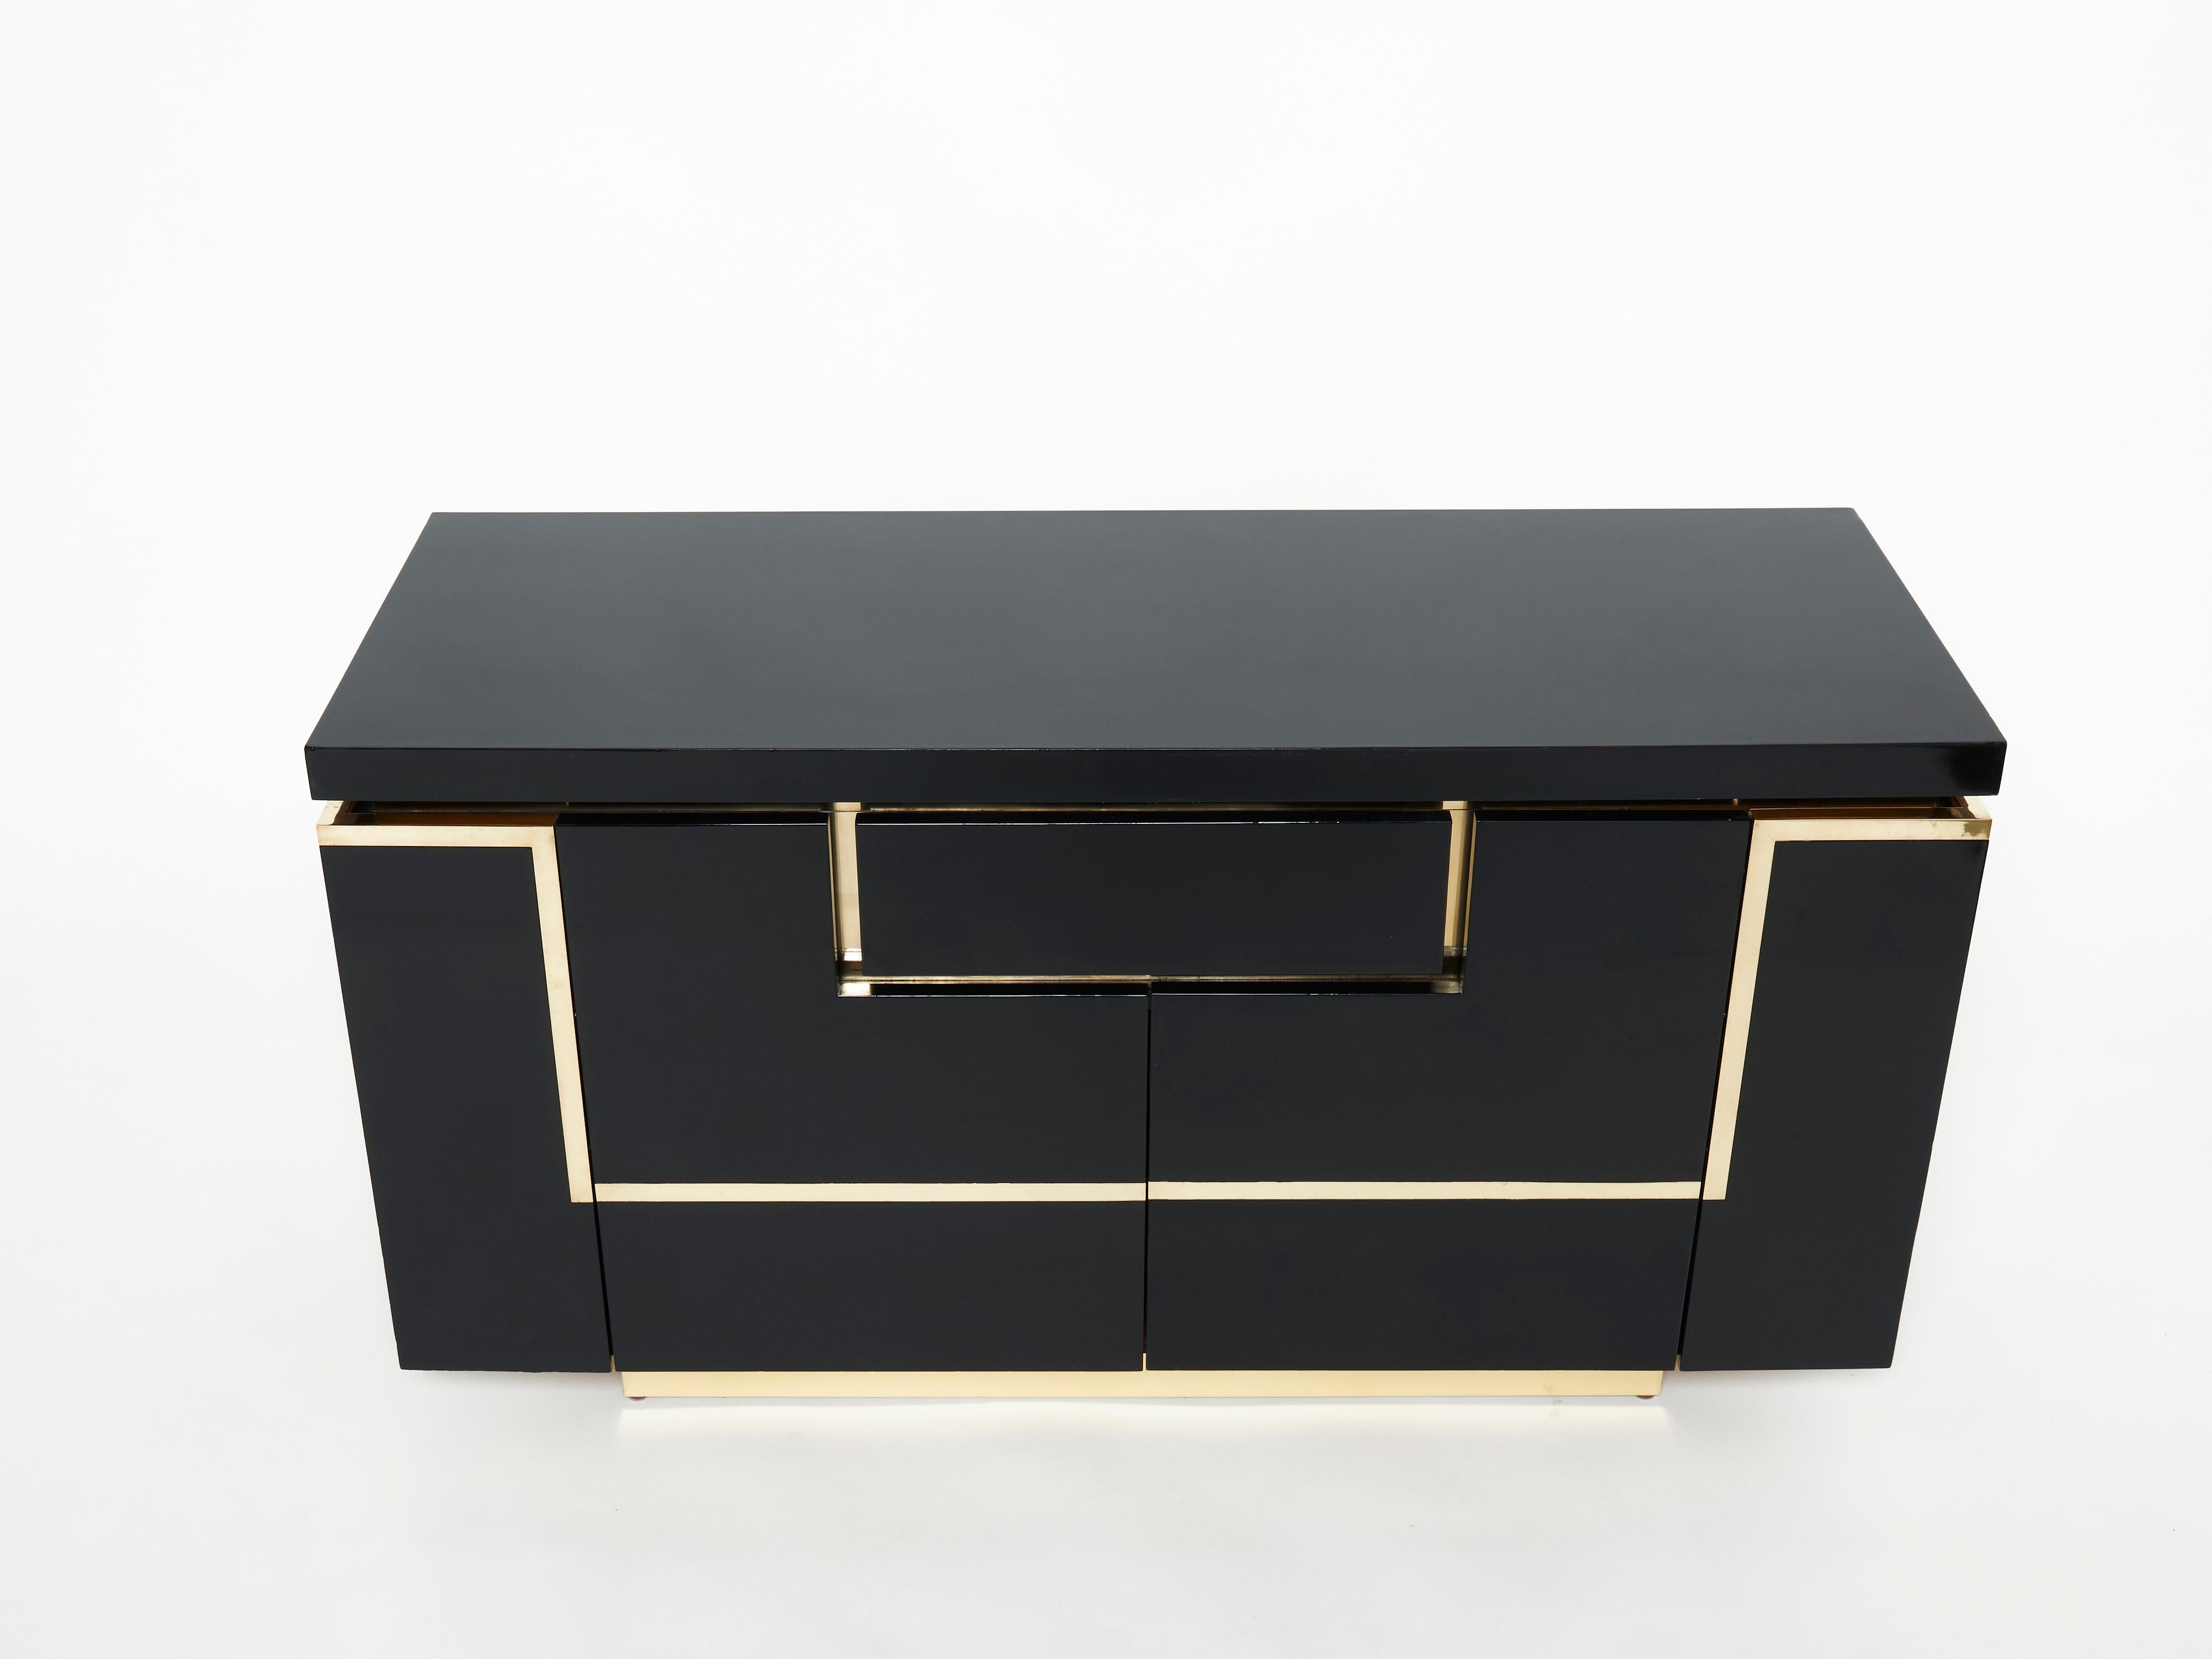 A timeless vintage piece, this mid-century cabinet bar sideboard feels imposing and glamourous, with thick, straight lines of brass adorning its exterior of reflective black lacquer. Glossy black lacquer, paired with bright brass accents, feels